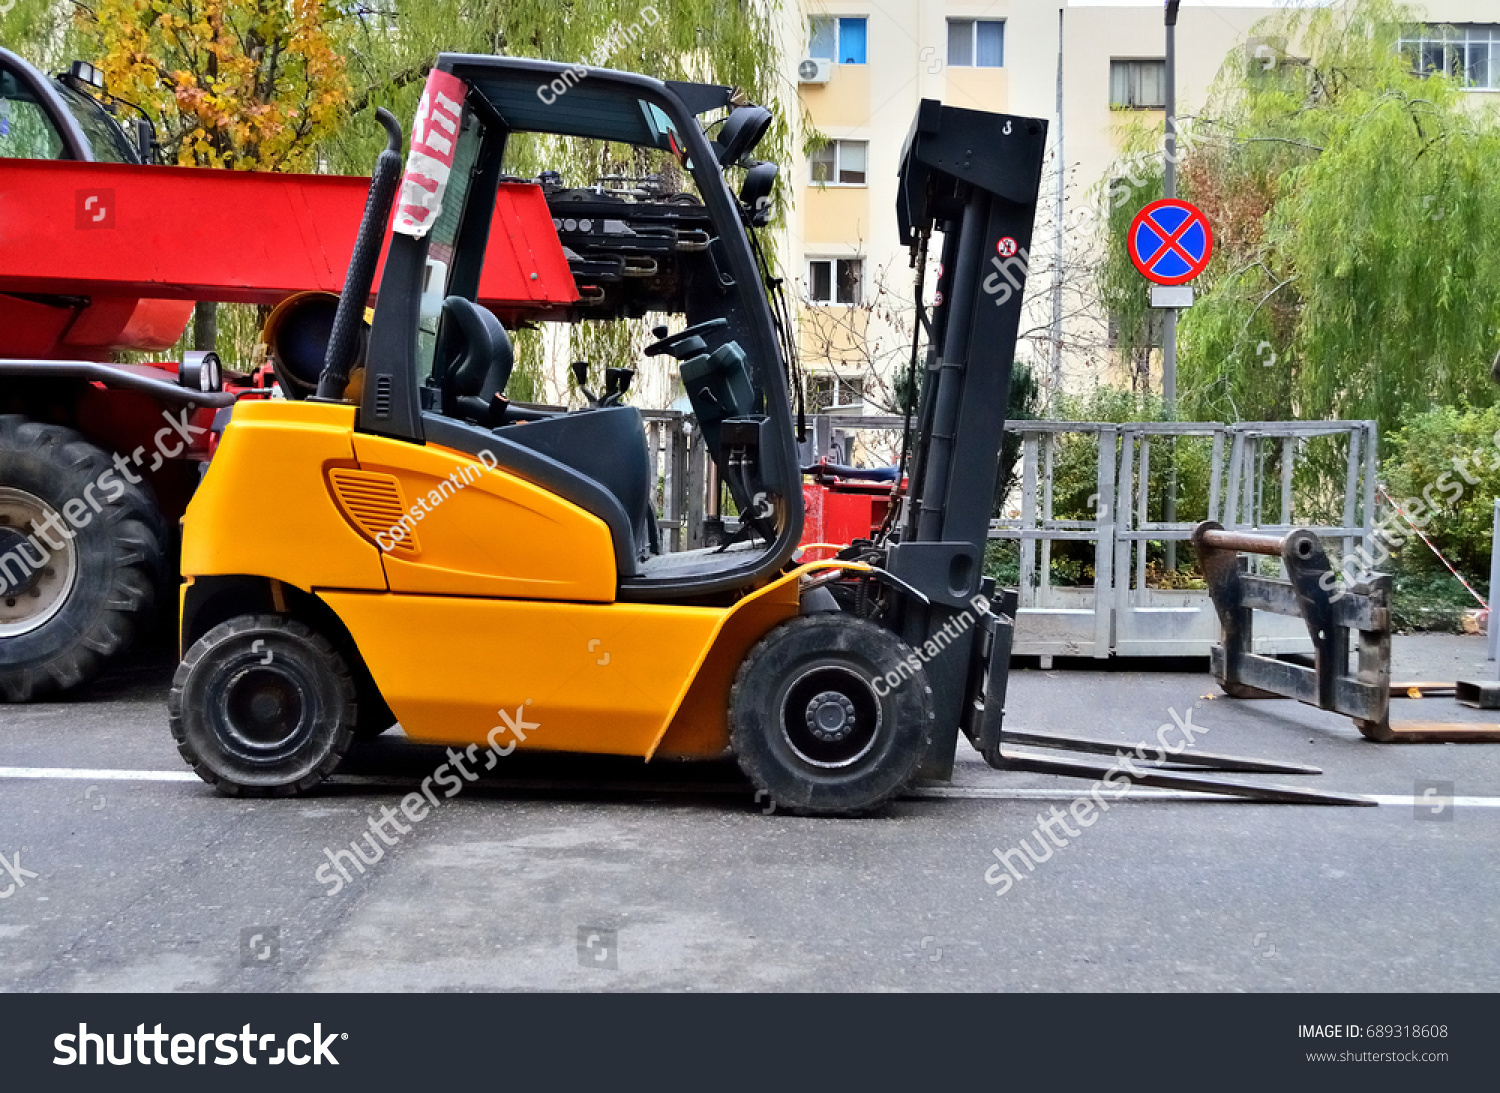 Yellow Forklift Truck Outside Industrial Stock Photo Edit Now 689318608